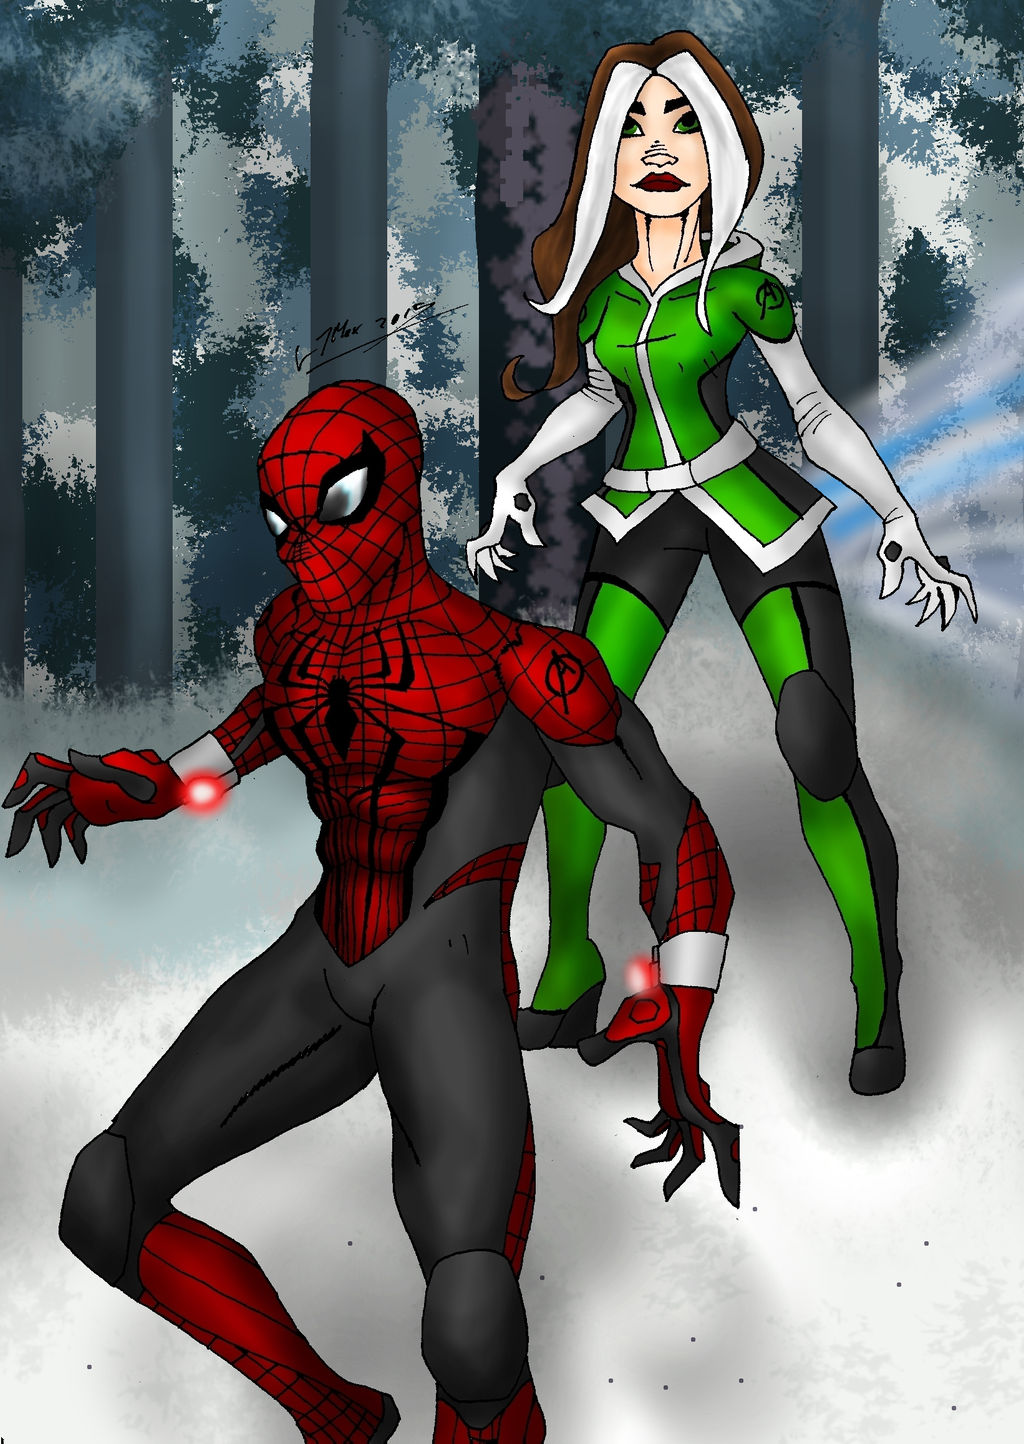 Age of Ultron: Spider-Man and Rogue by Hlontro on DeviantArt